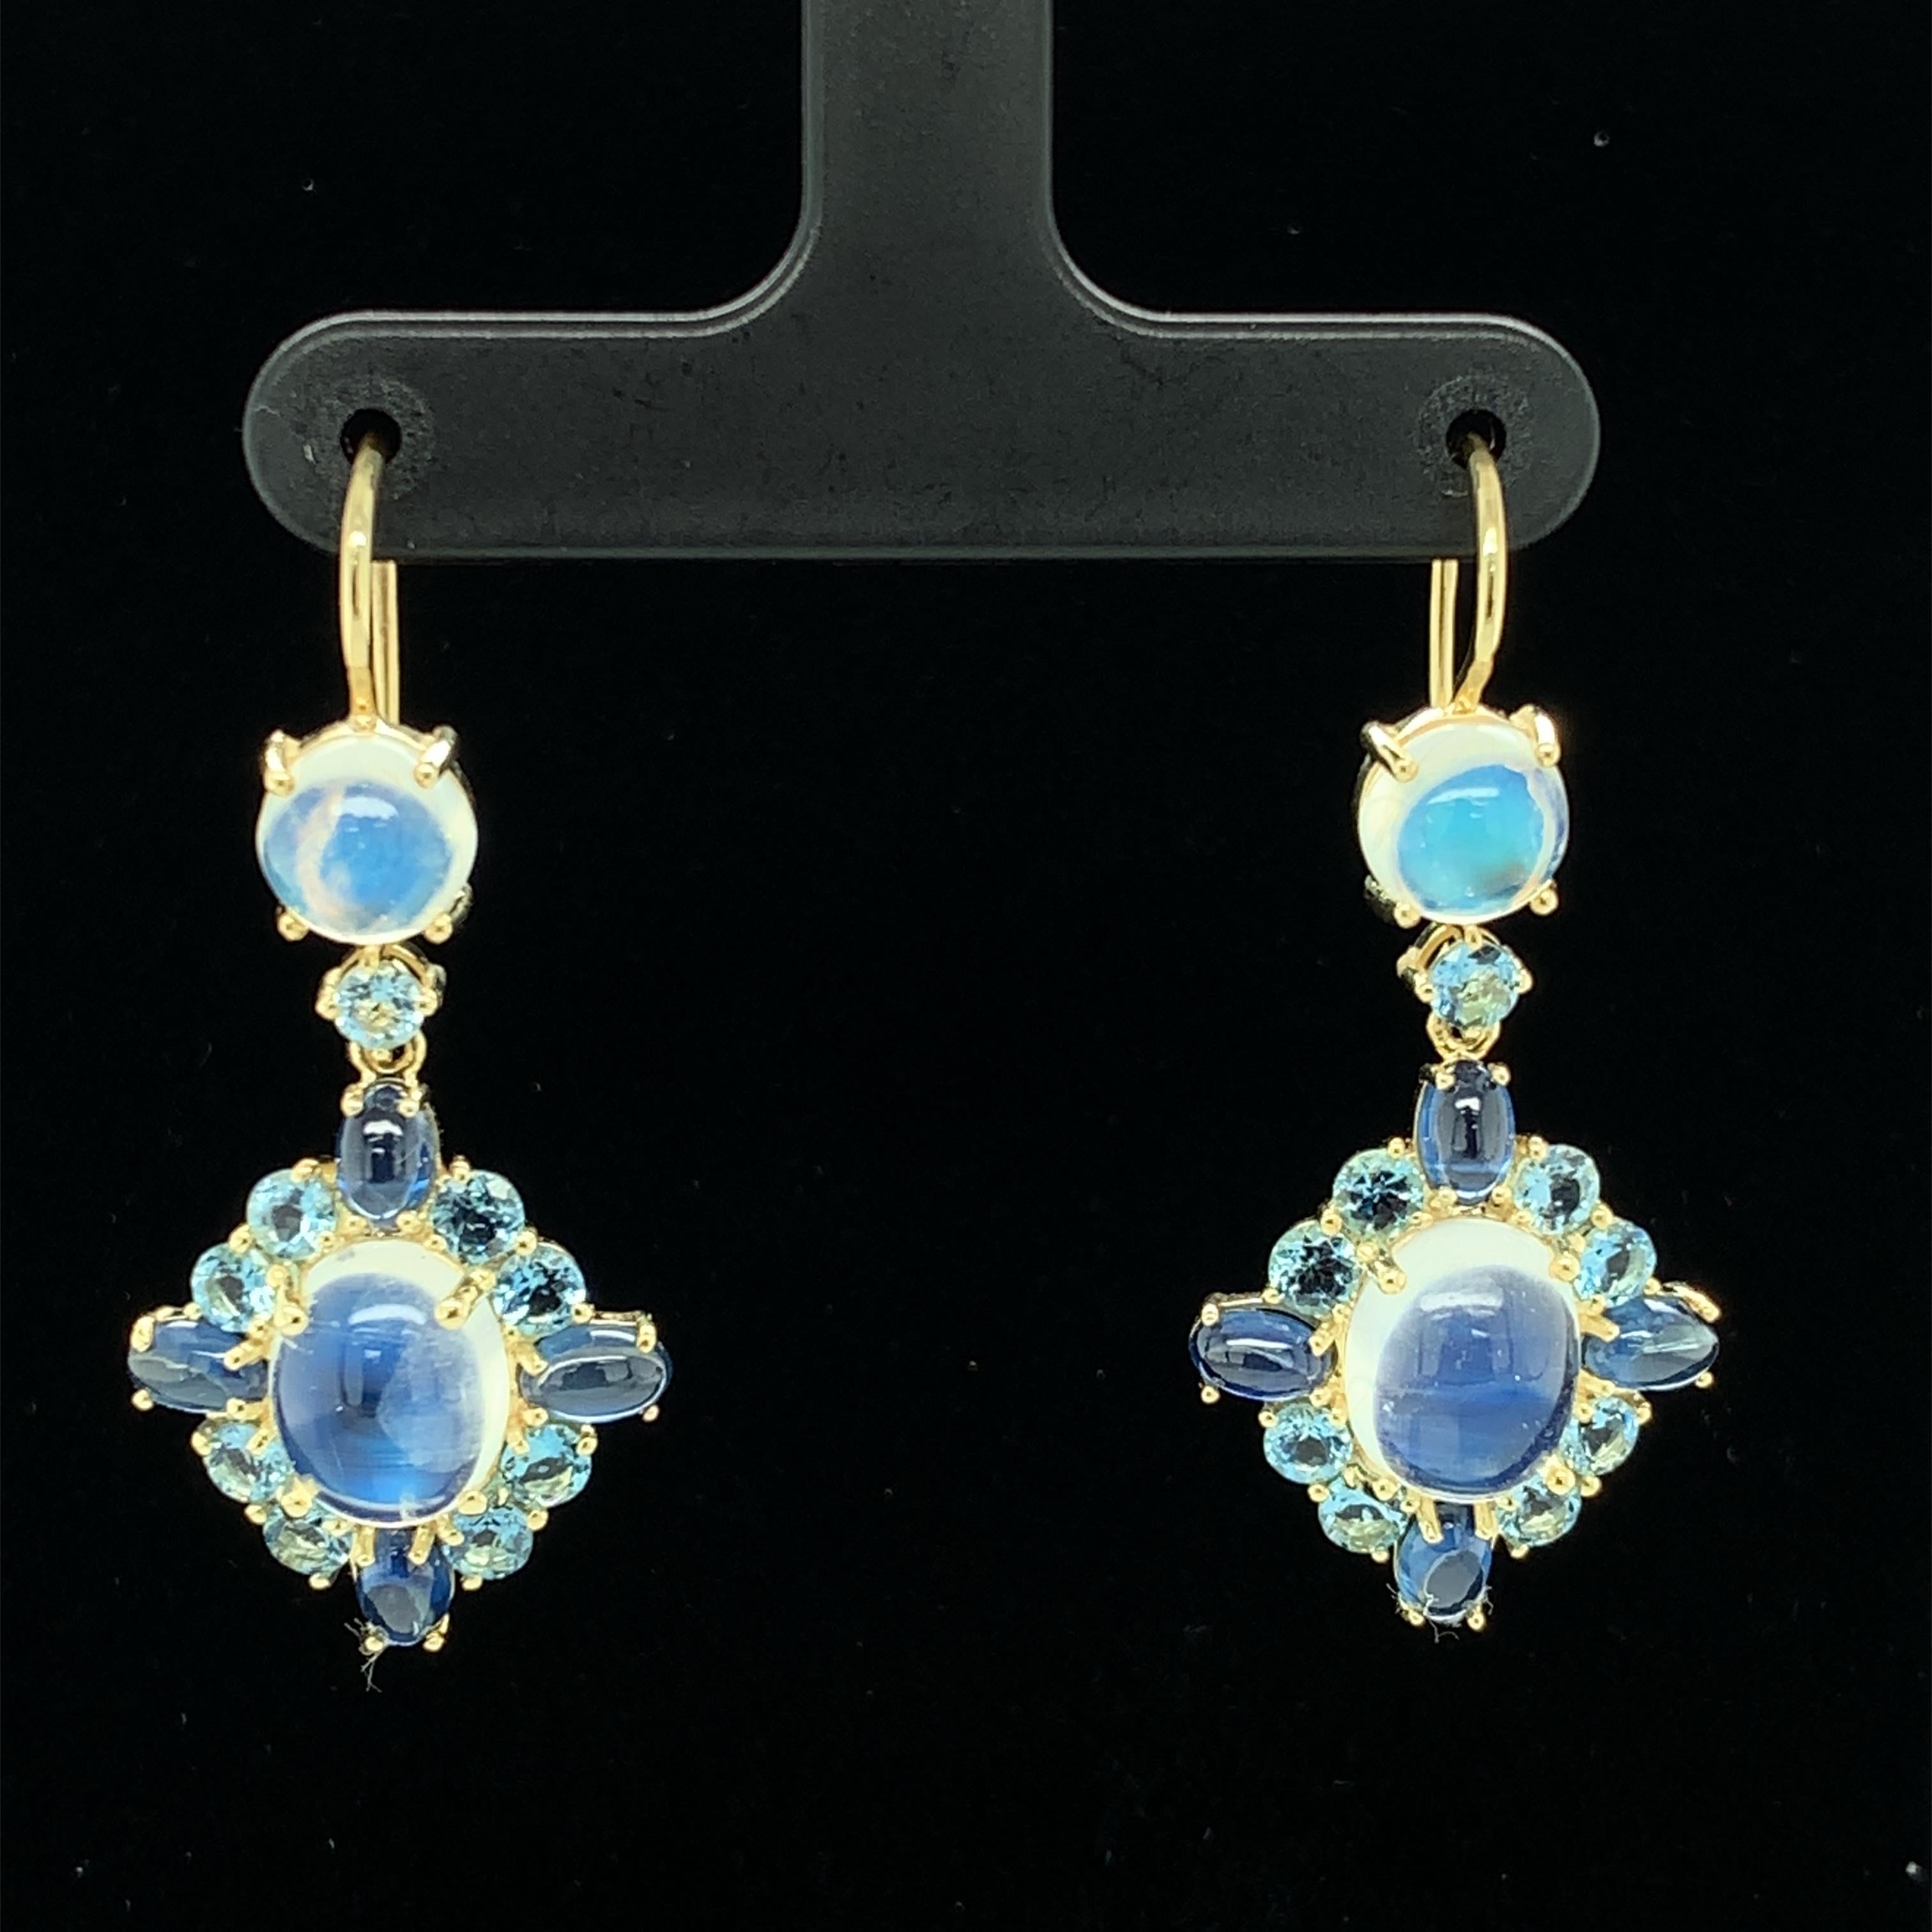 Designed to be as fun as they are elegant, these handmade 18k yellow gold drop earrings feature quality craftsmanship and a striking combination of “blue flash” moonstones, rich blue sapphire cabochons, and faceted aquamarines of unusually deep